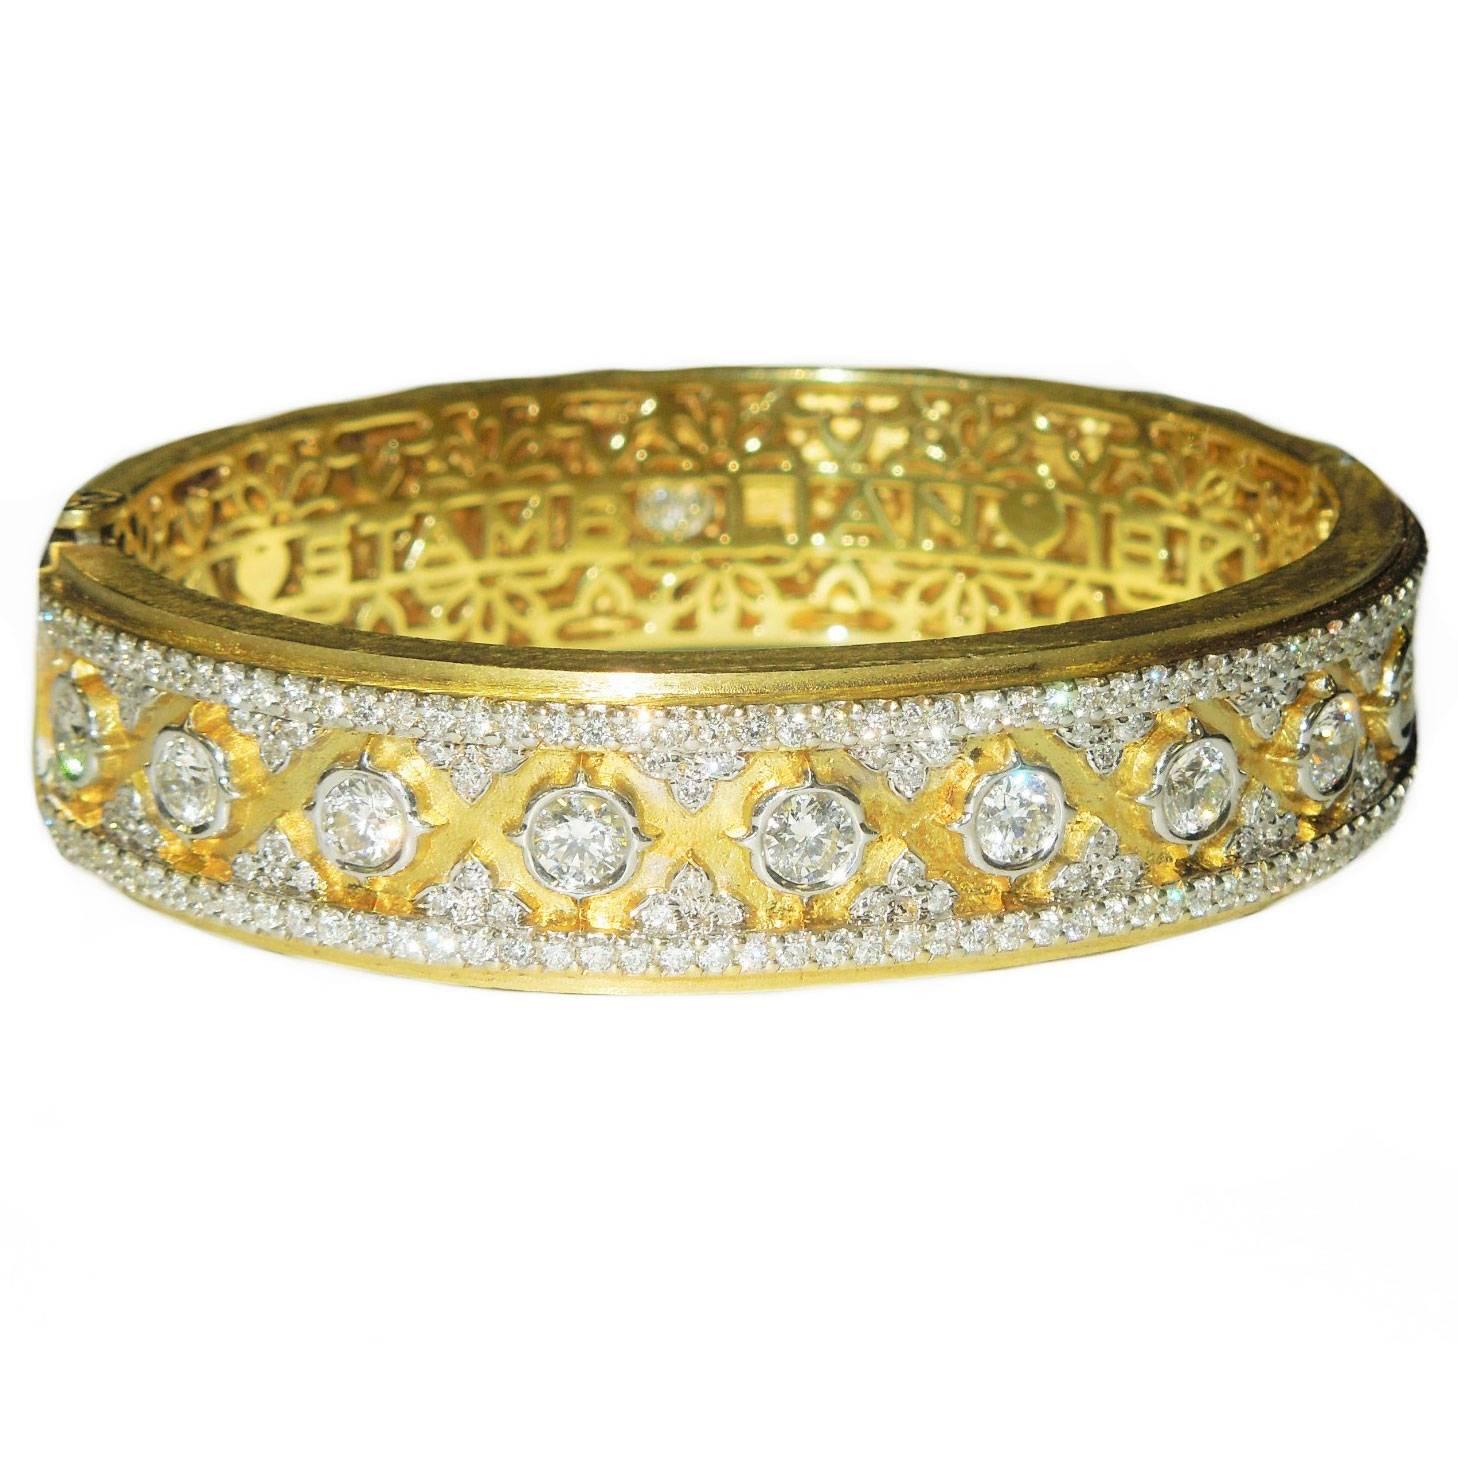 18K Gold Bangle with Diamonds all around

Center stones are 0.25ct. each (10)

Total Diamond weight: 5.22ct.-G Color, VS Quality

Design is seen on entire piece and has a very secure Push Button clasp. 

Signed STAMBOLIAN with our Trademark